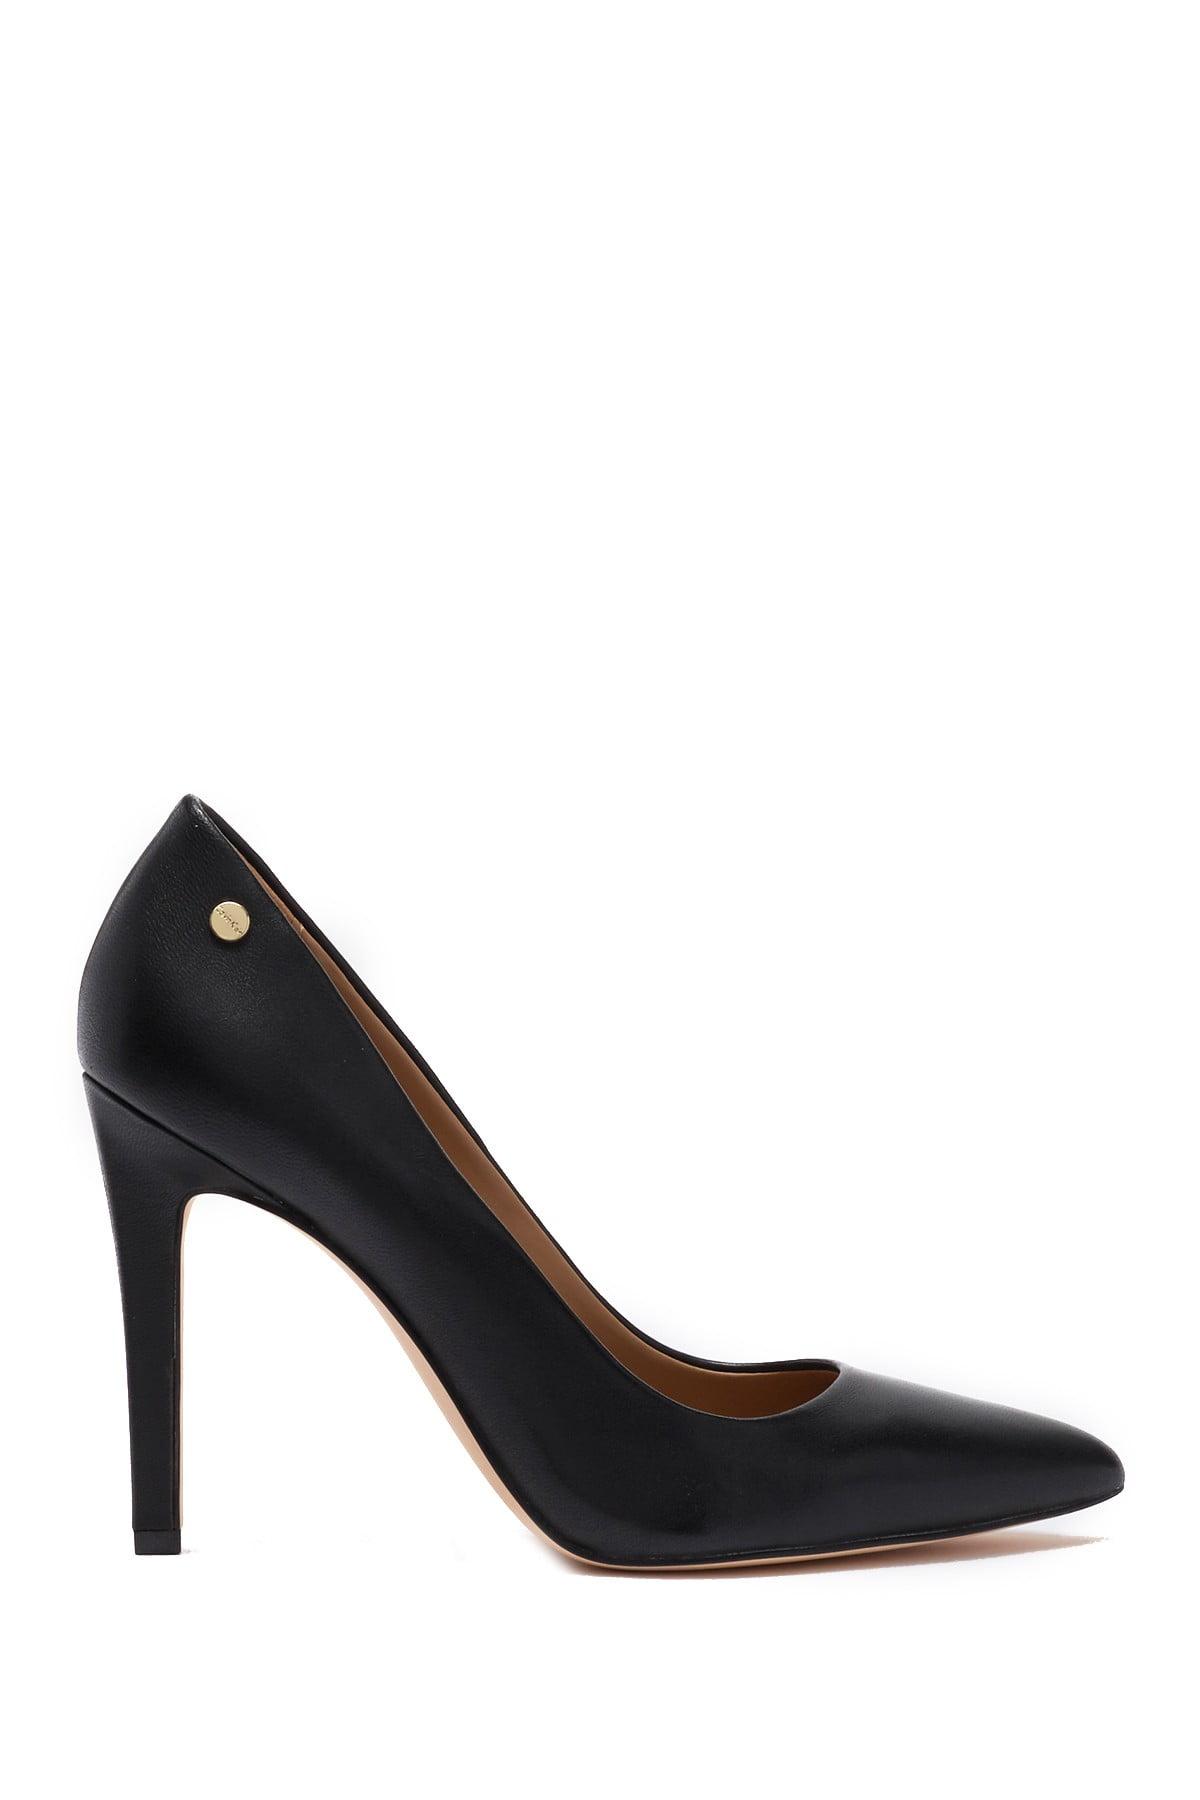 Calvin Klein Brady Leather Pointed Toe Pump - Wide Width Available in Black  - Lyst